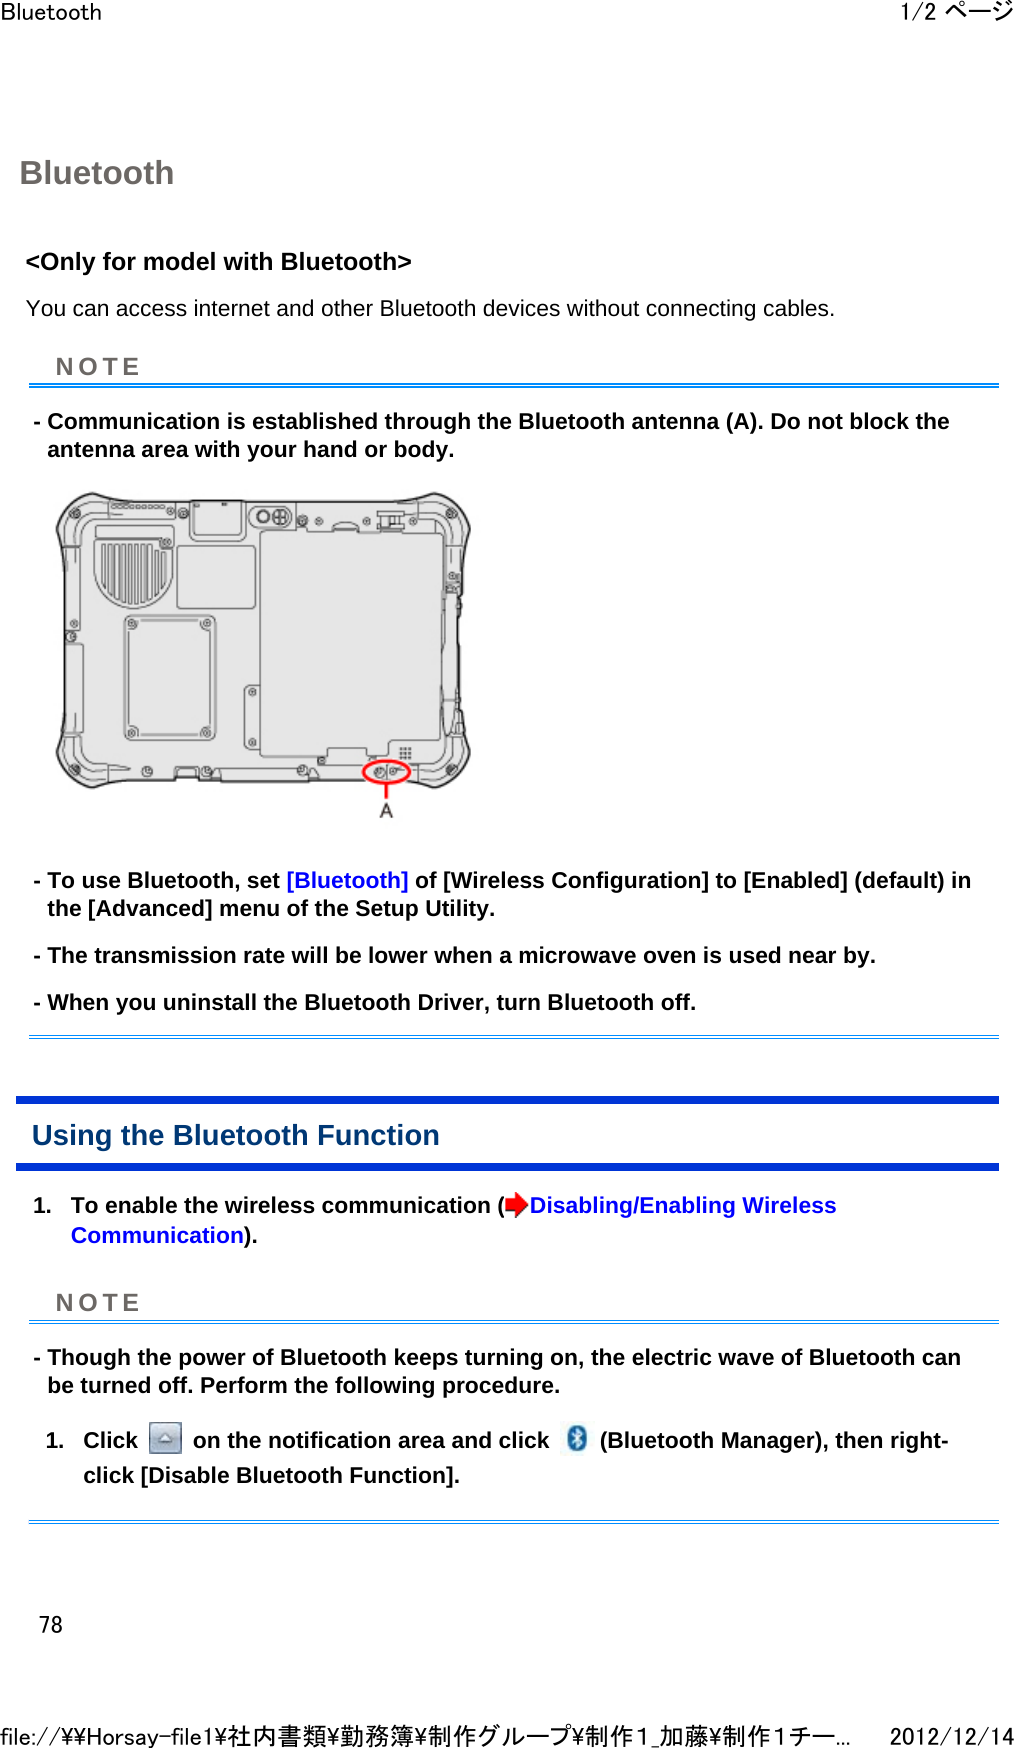 Bluetooth &lt;Only for model with Bluetooth&gt;  You can access internet and other Bluetooth devices without connecting cables.  - Communication is established through the Bluetooth antenna (A). Do not block the antenna area with your hand or body.   - To use Bluetooth, set [Bluetooth] of [Wireless Configuration] to [Enabled] (default) in the [Advanced] menu of the Setup Utility. - The transmission rate will be lower when a microwave oven is used near by. - When you uninstall the Bluetooth Driver, turn Bluetooth off. Using the Bluetooth Function 1. To enable the wireless communication ( Disabling/Enabling Wireless Communication).  - Though the power of Bluetooth keeps turning on, the electric wave of Bluetooth can be turned off. Perform the following procedure. 1. Click   on the notification area and click  (Bluetooth Manager), then right-click [Disable Bluetooth Function].  NOTENOTE1/2 ページBluetooth2012/12/14file://\\Horsay-file1\社内書類\勤務簿\制作グループ\制作１_加藤\制作１チー...78